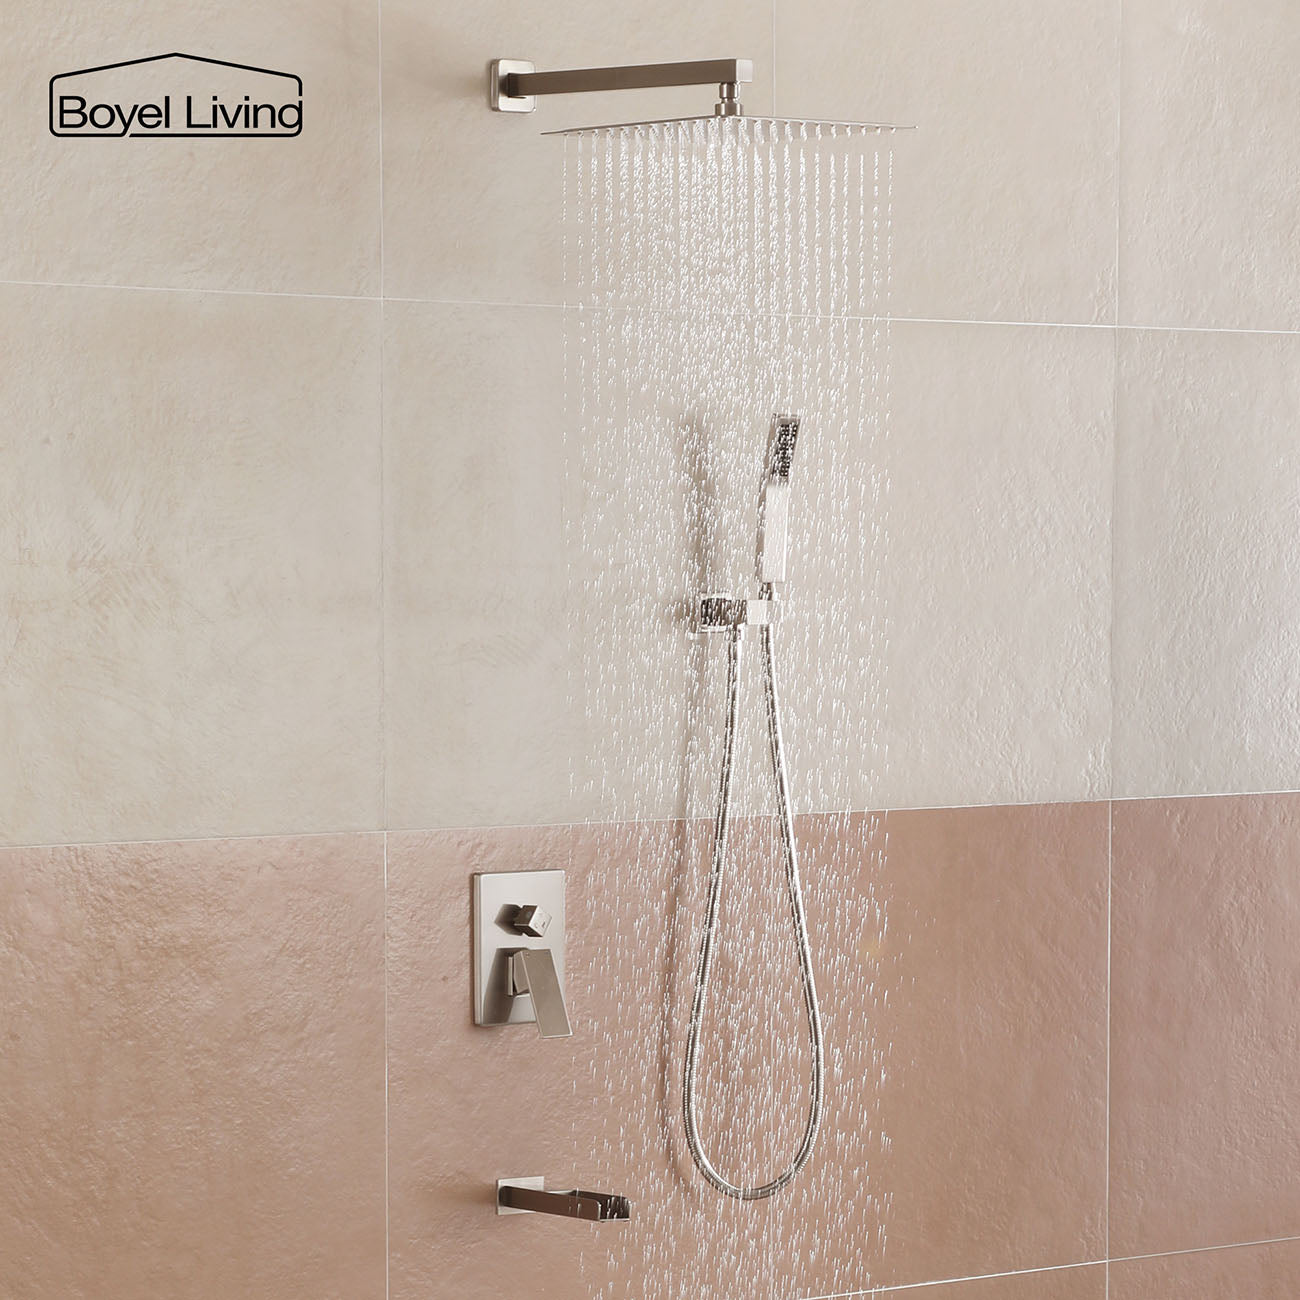 Boyel Living Rain Shower System with Handheld and Waterfall Tub Spout in Brushed Nickel-Boyel Living